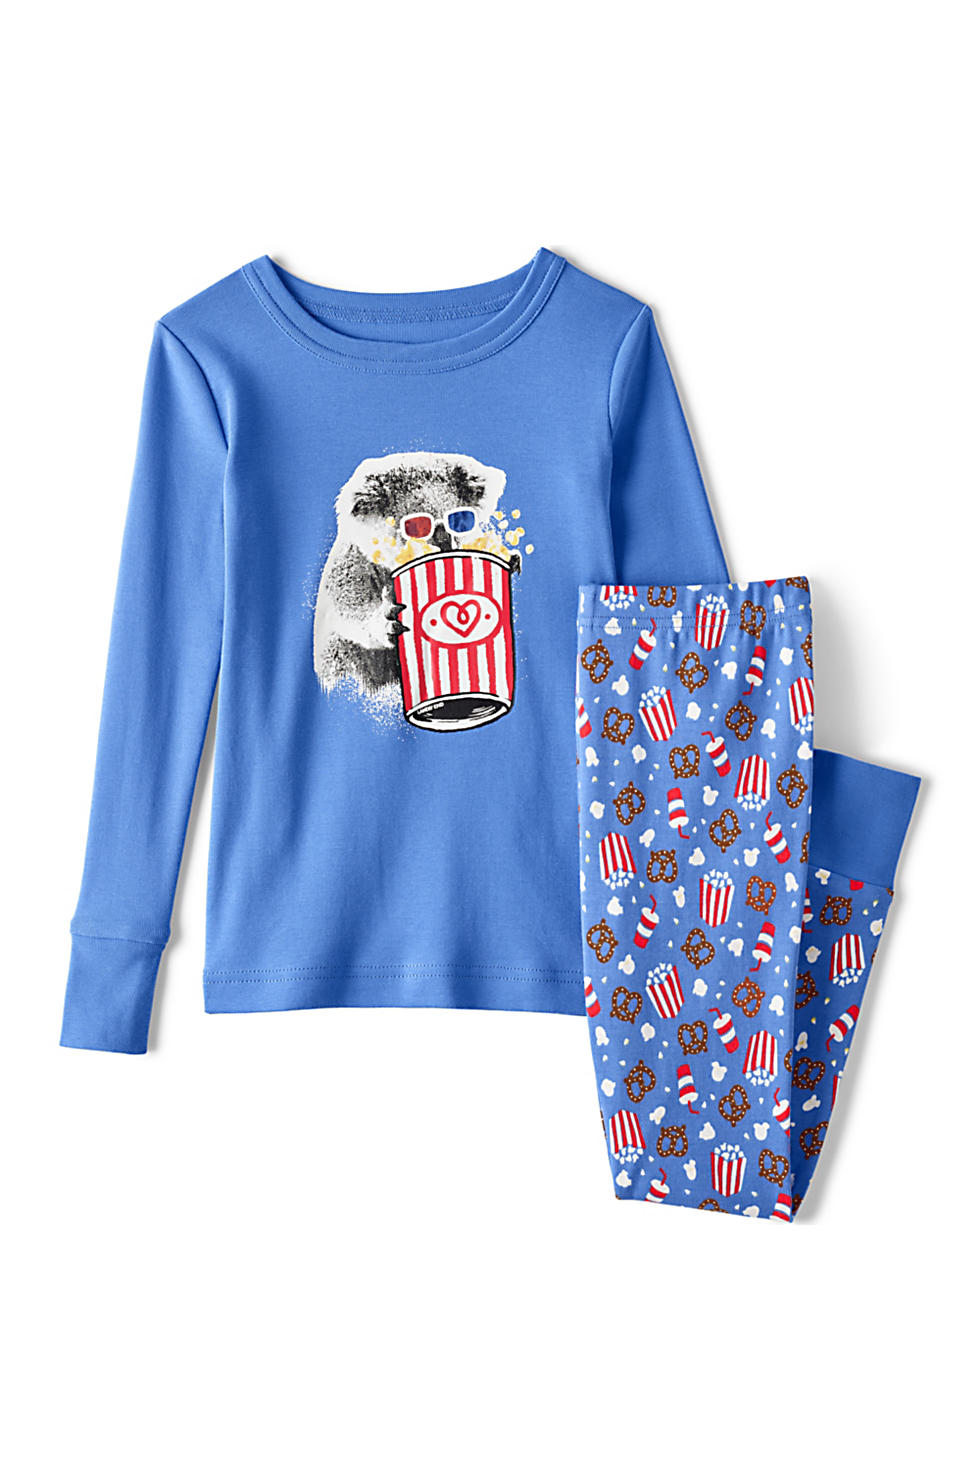 Lands End Kids Long Sleeve Top and Bottom Snug Fit Pajama Set (in 3 colors)